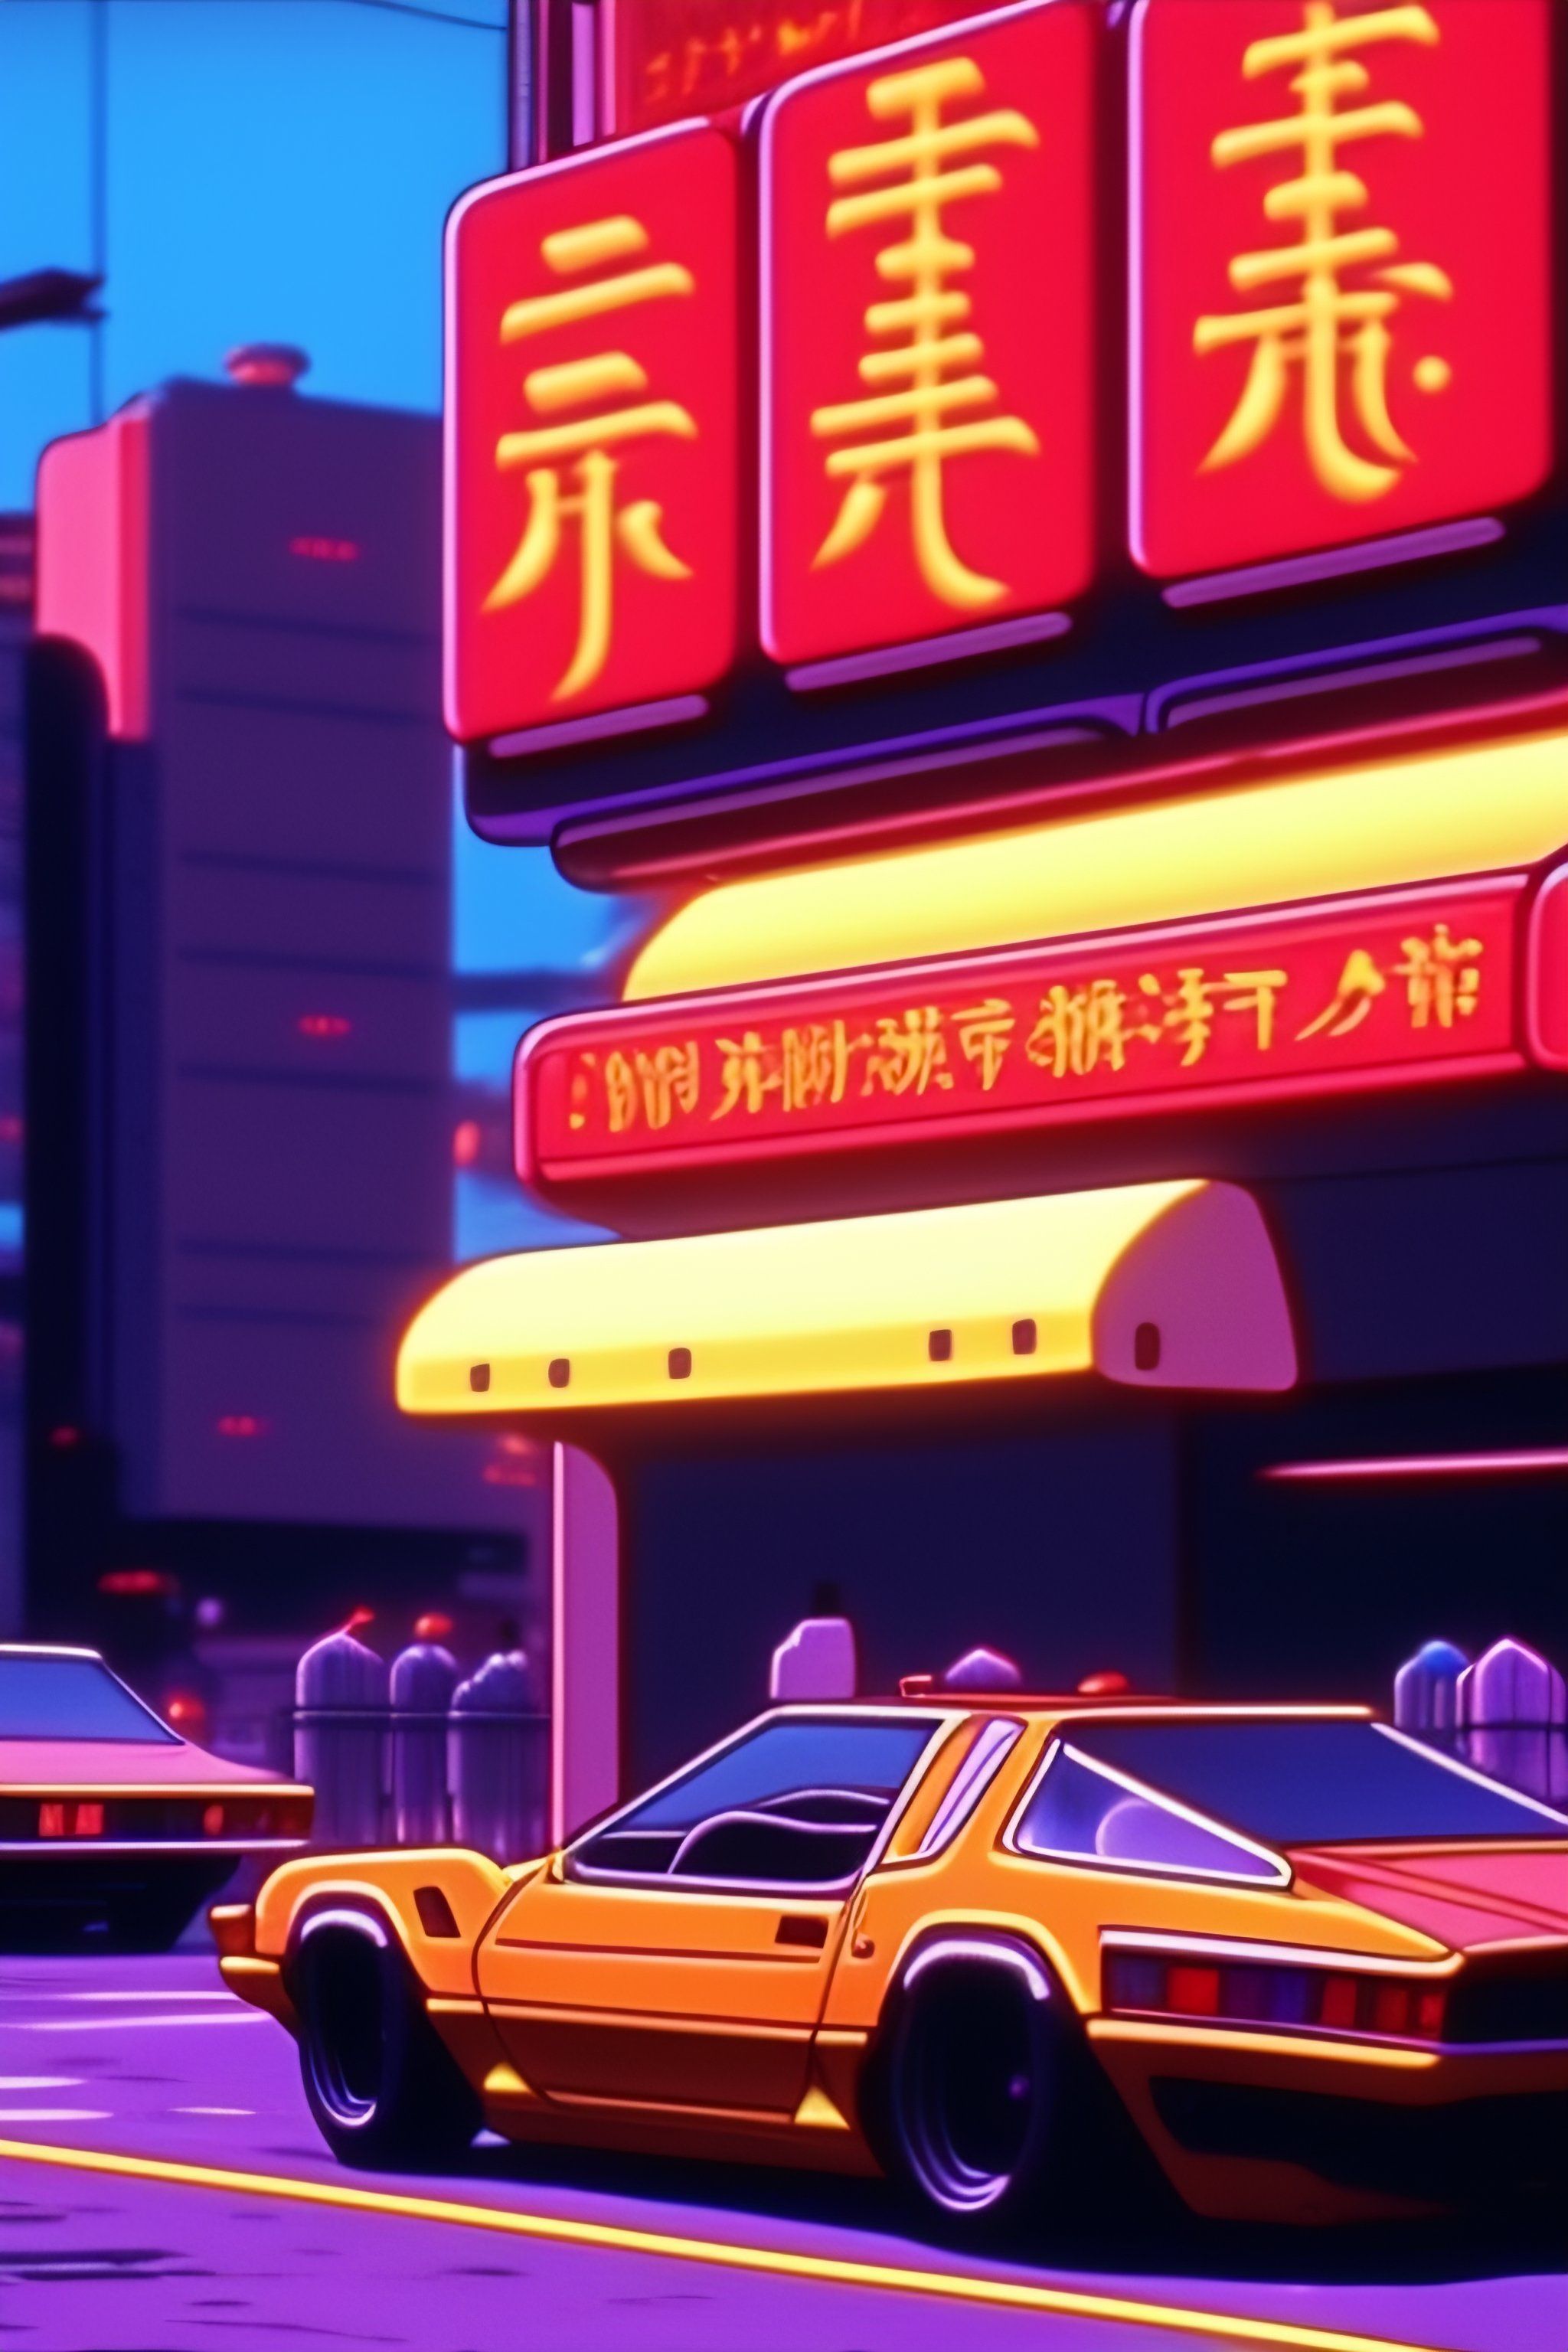 Lexica anime screenshot from Akira, 90's anime aesthetic. Incredibly detailed cinematic shot. Neo Tokyo. Crowded city. Neon lights